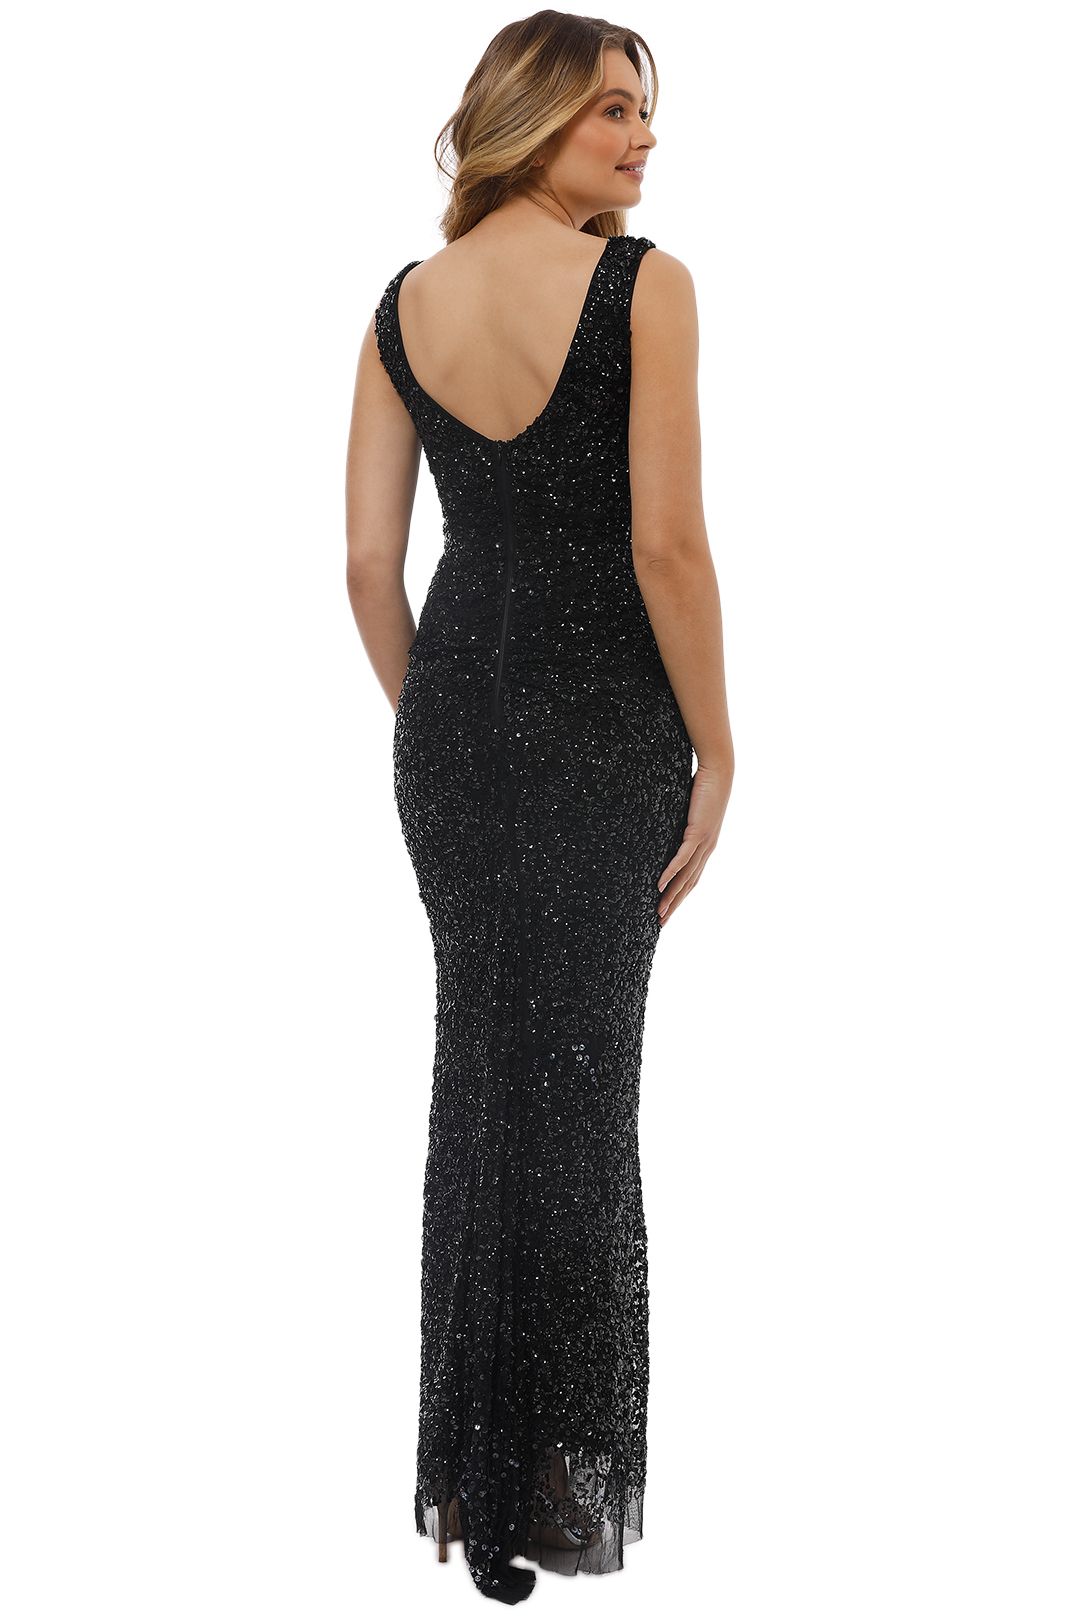 Montique - Layla Hand Beaded Gown - Black - Back